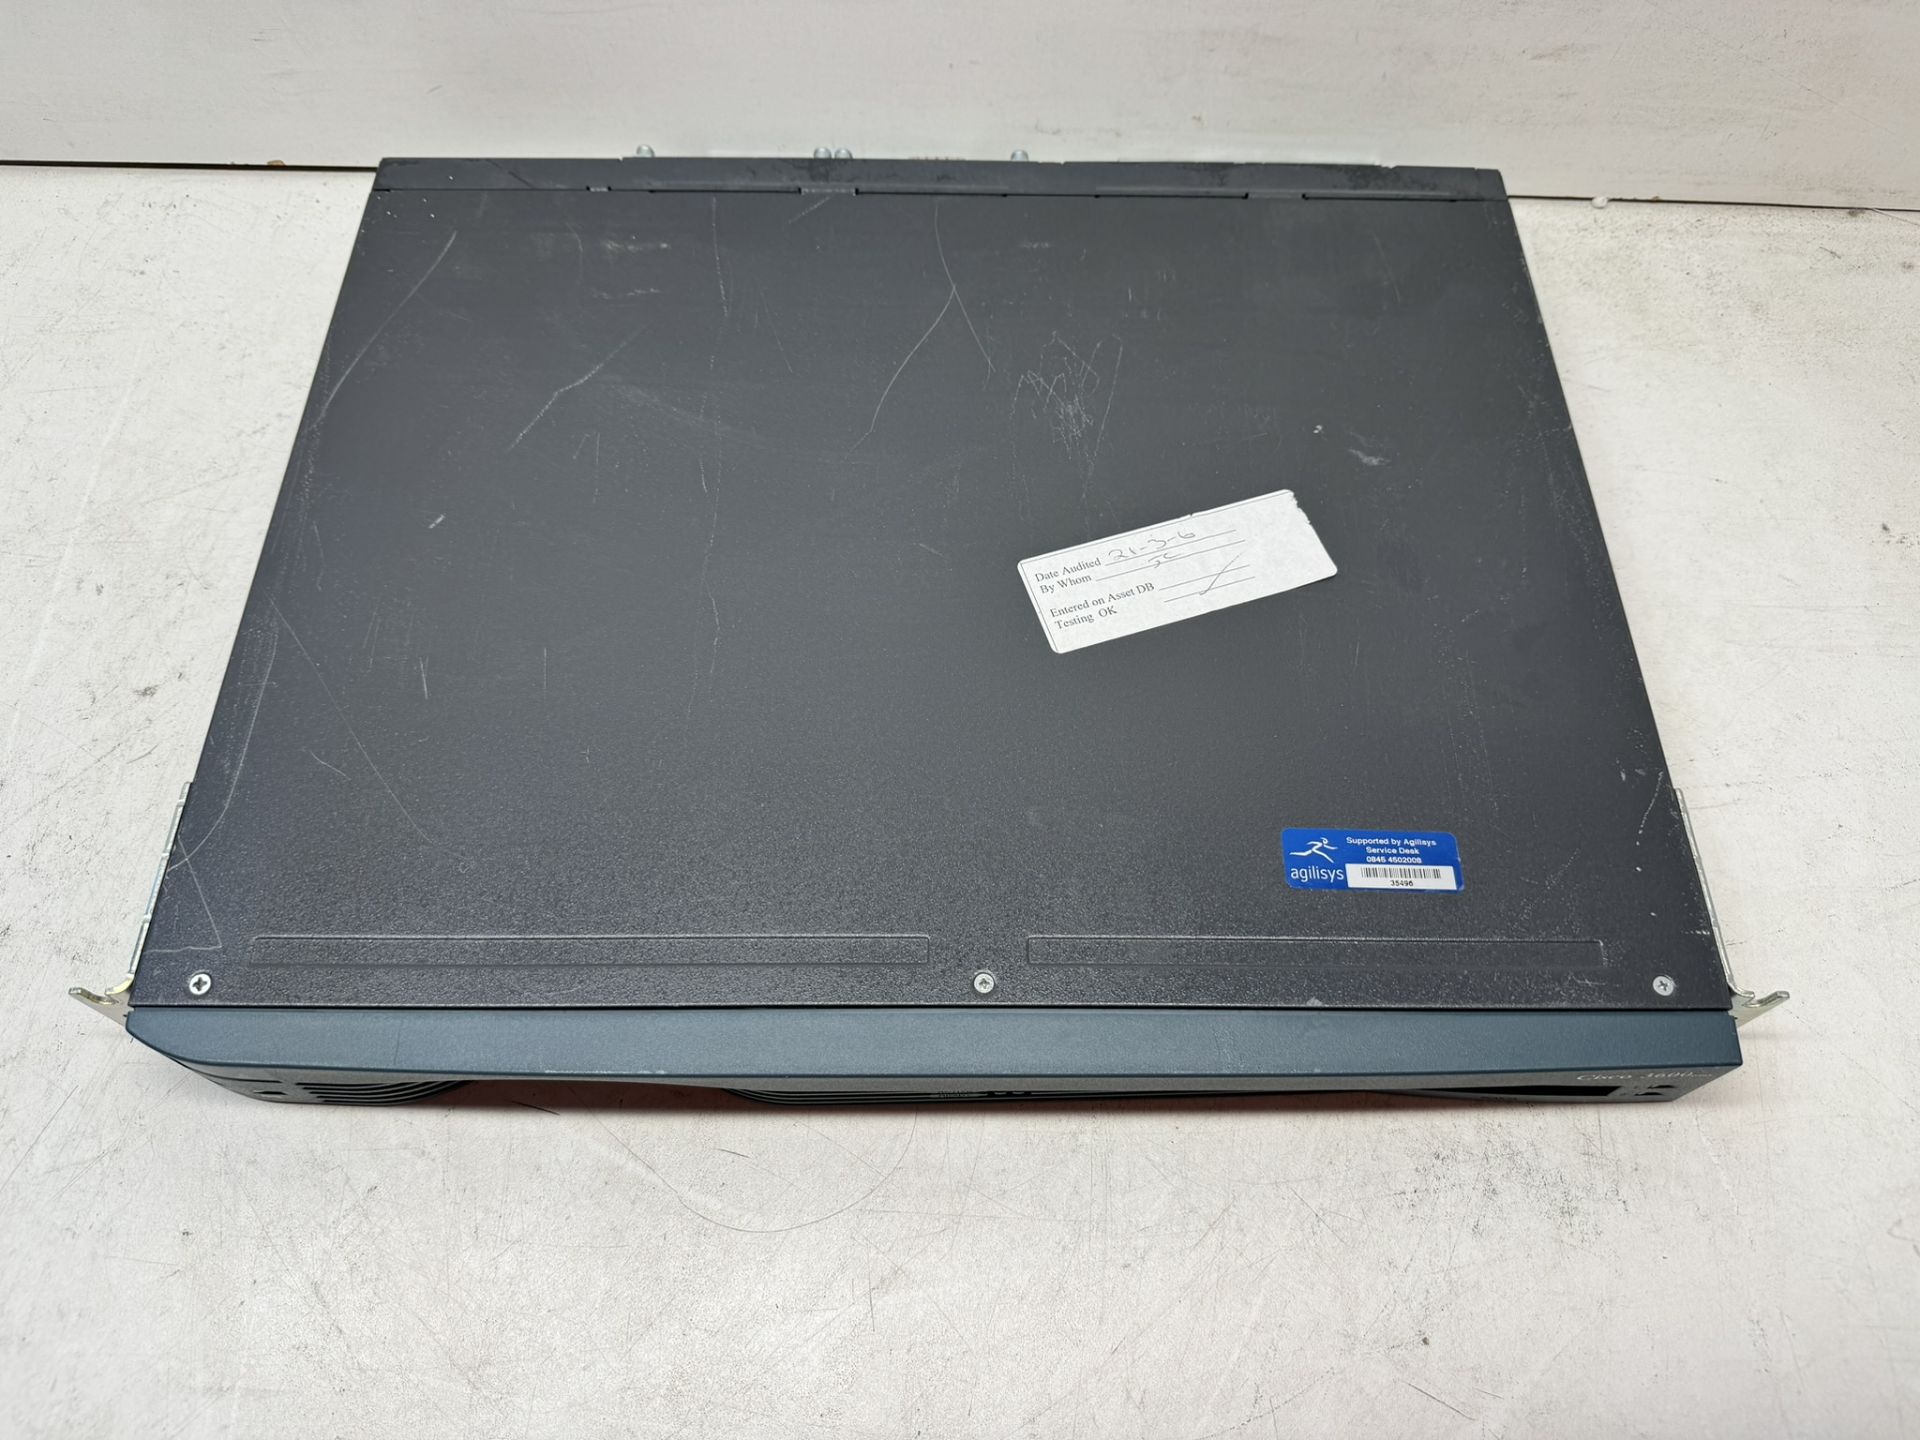 Cisco 3600 2-slot Modular Router-AC with IP Software - Image 2 of 5